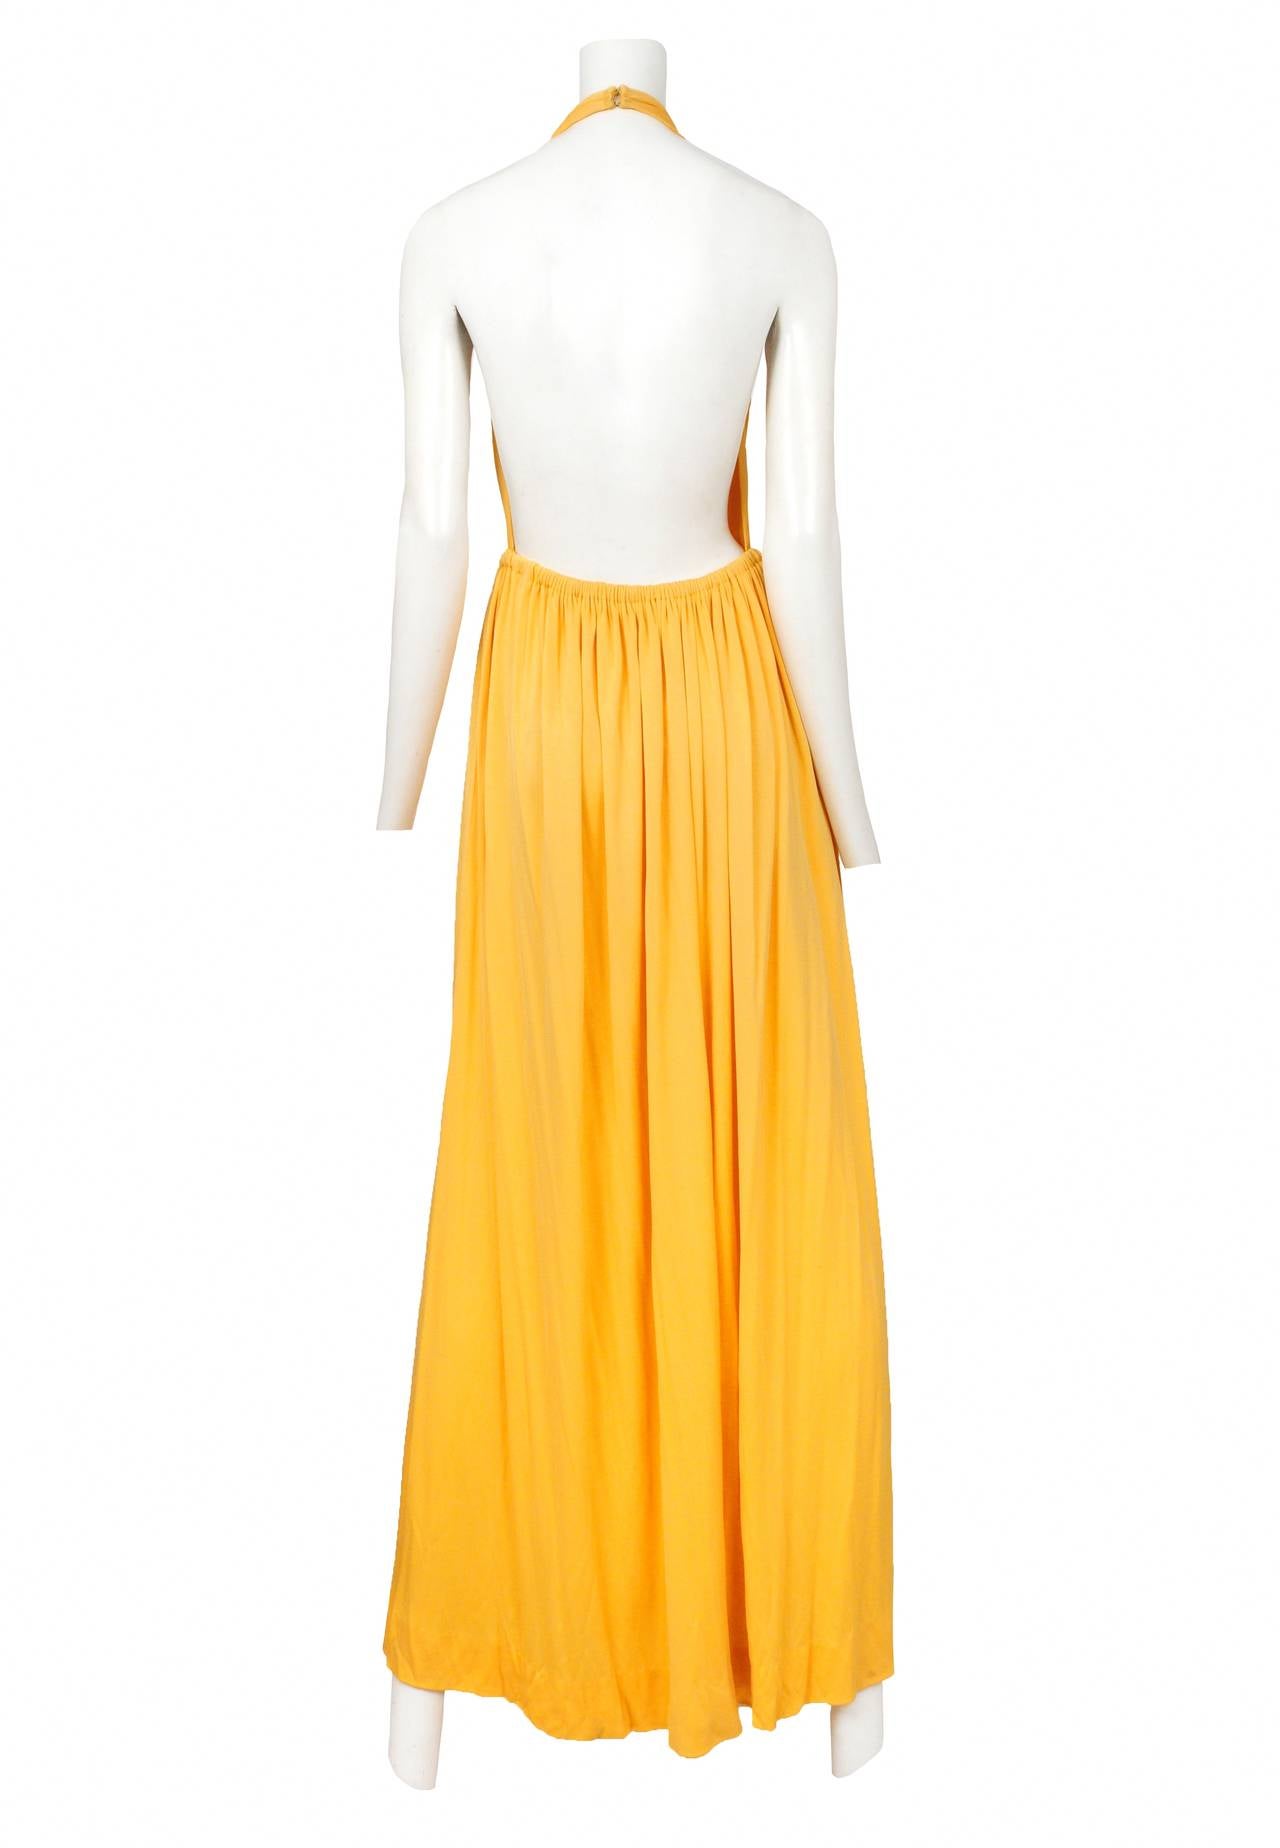 Vintage Halston marigold halter gown featuring an open back and gathered wrap waist line.